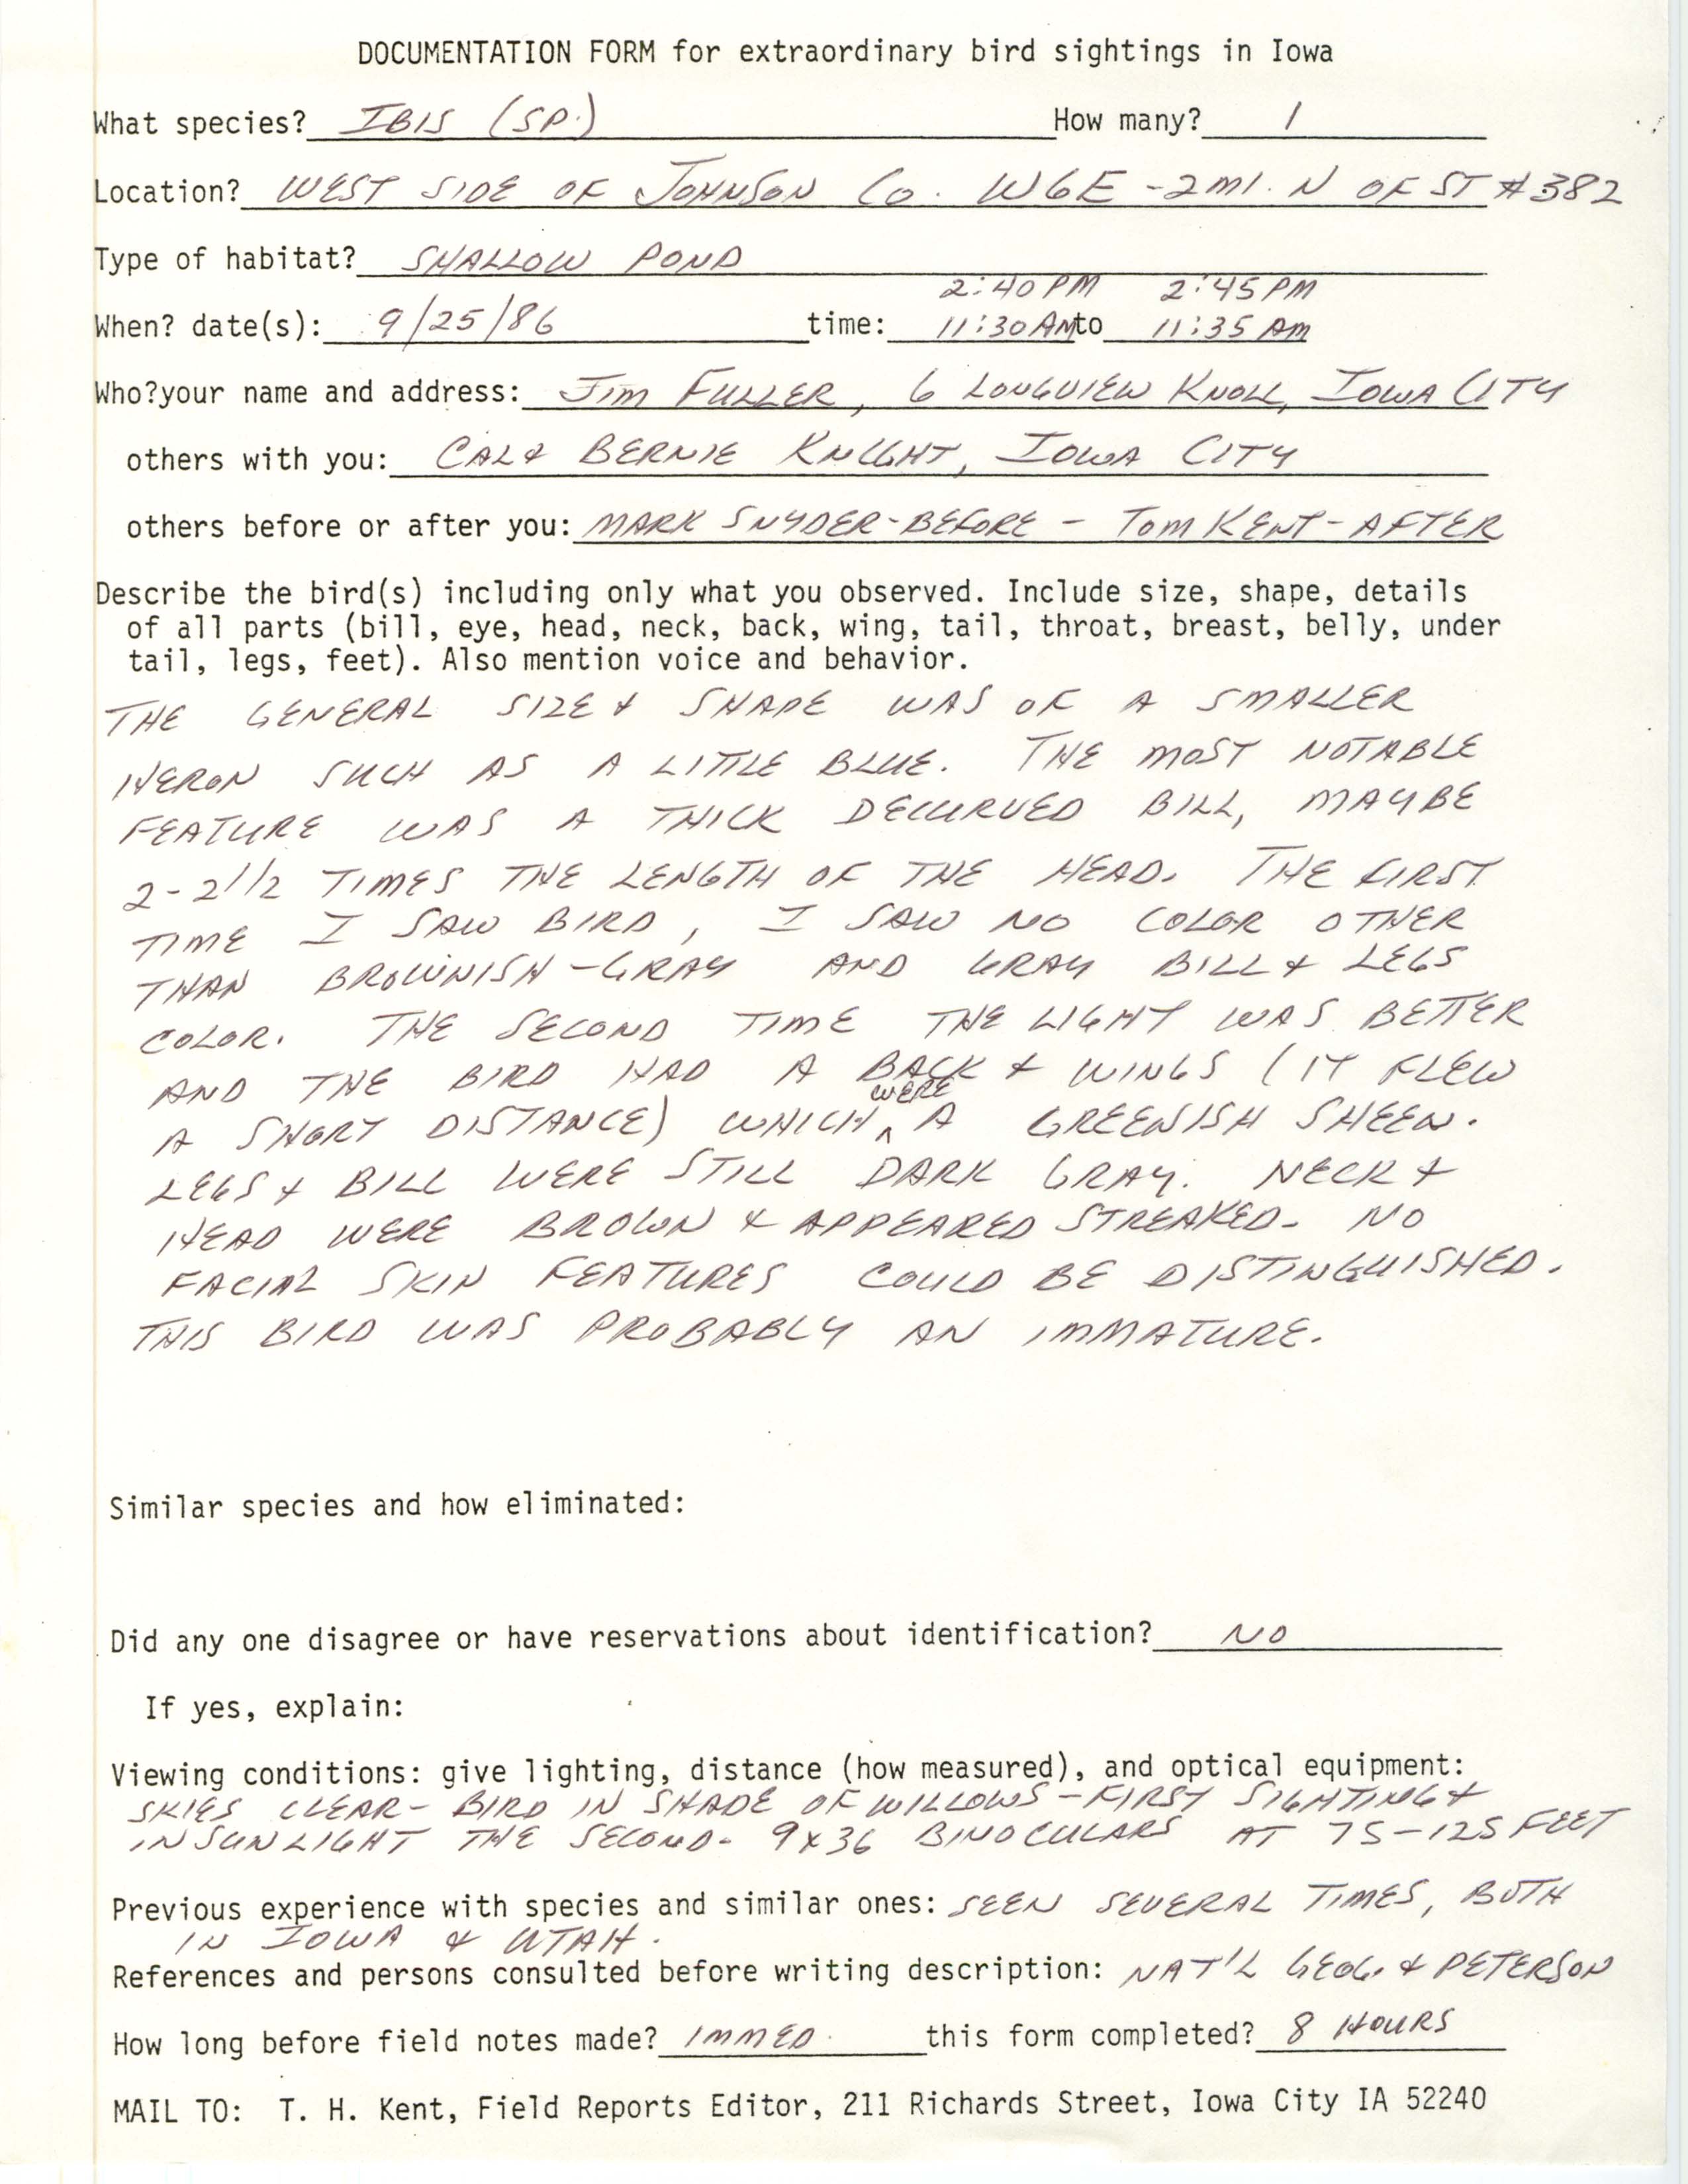 Rare bird documentation form for Ibis species at west side of Johnson County, 1986